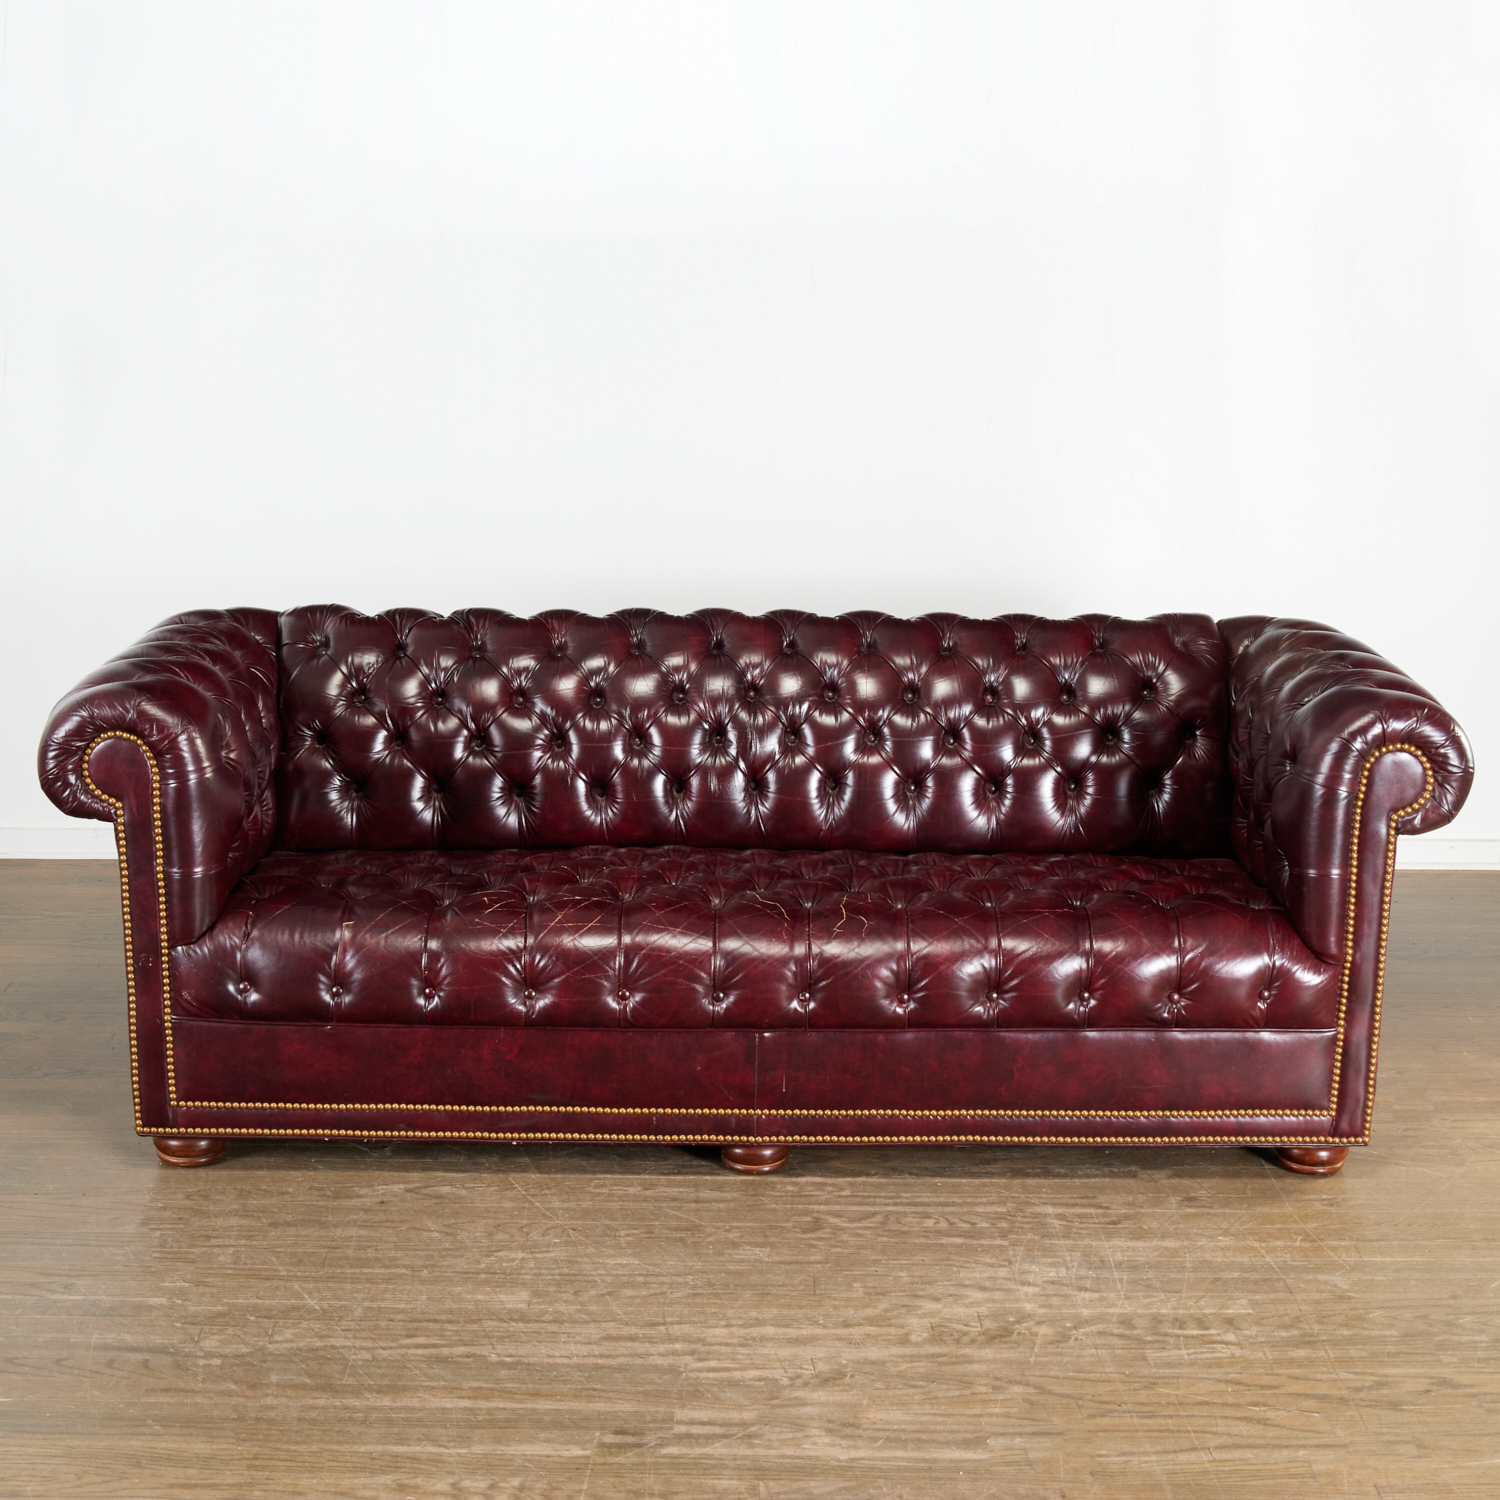 VINTAGE OXBLOOD LEATHER CHESTERFIELD